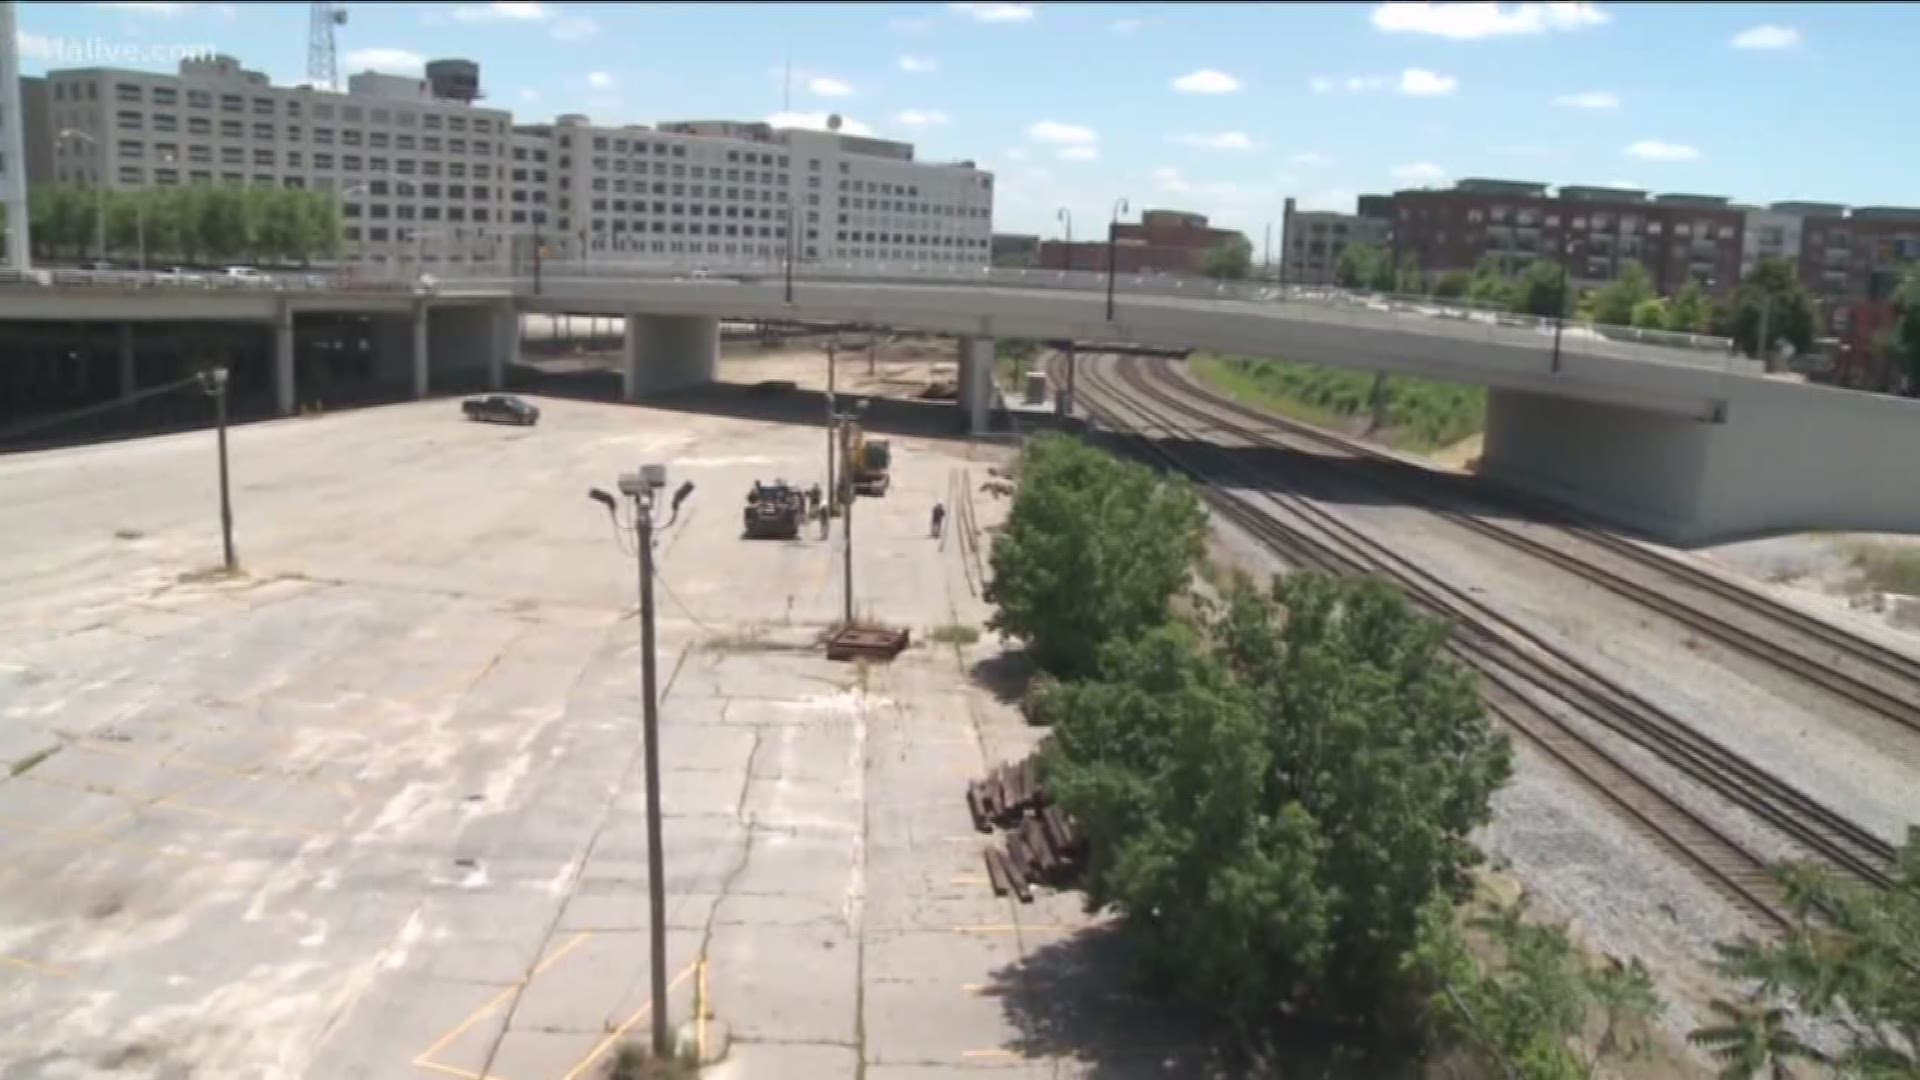 A group is challenging the city's plan to transform The Gulch early Wednesday morning.